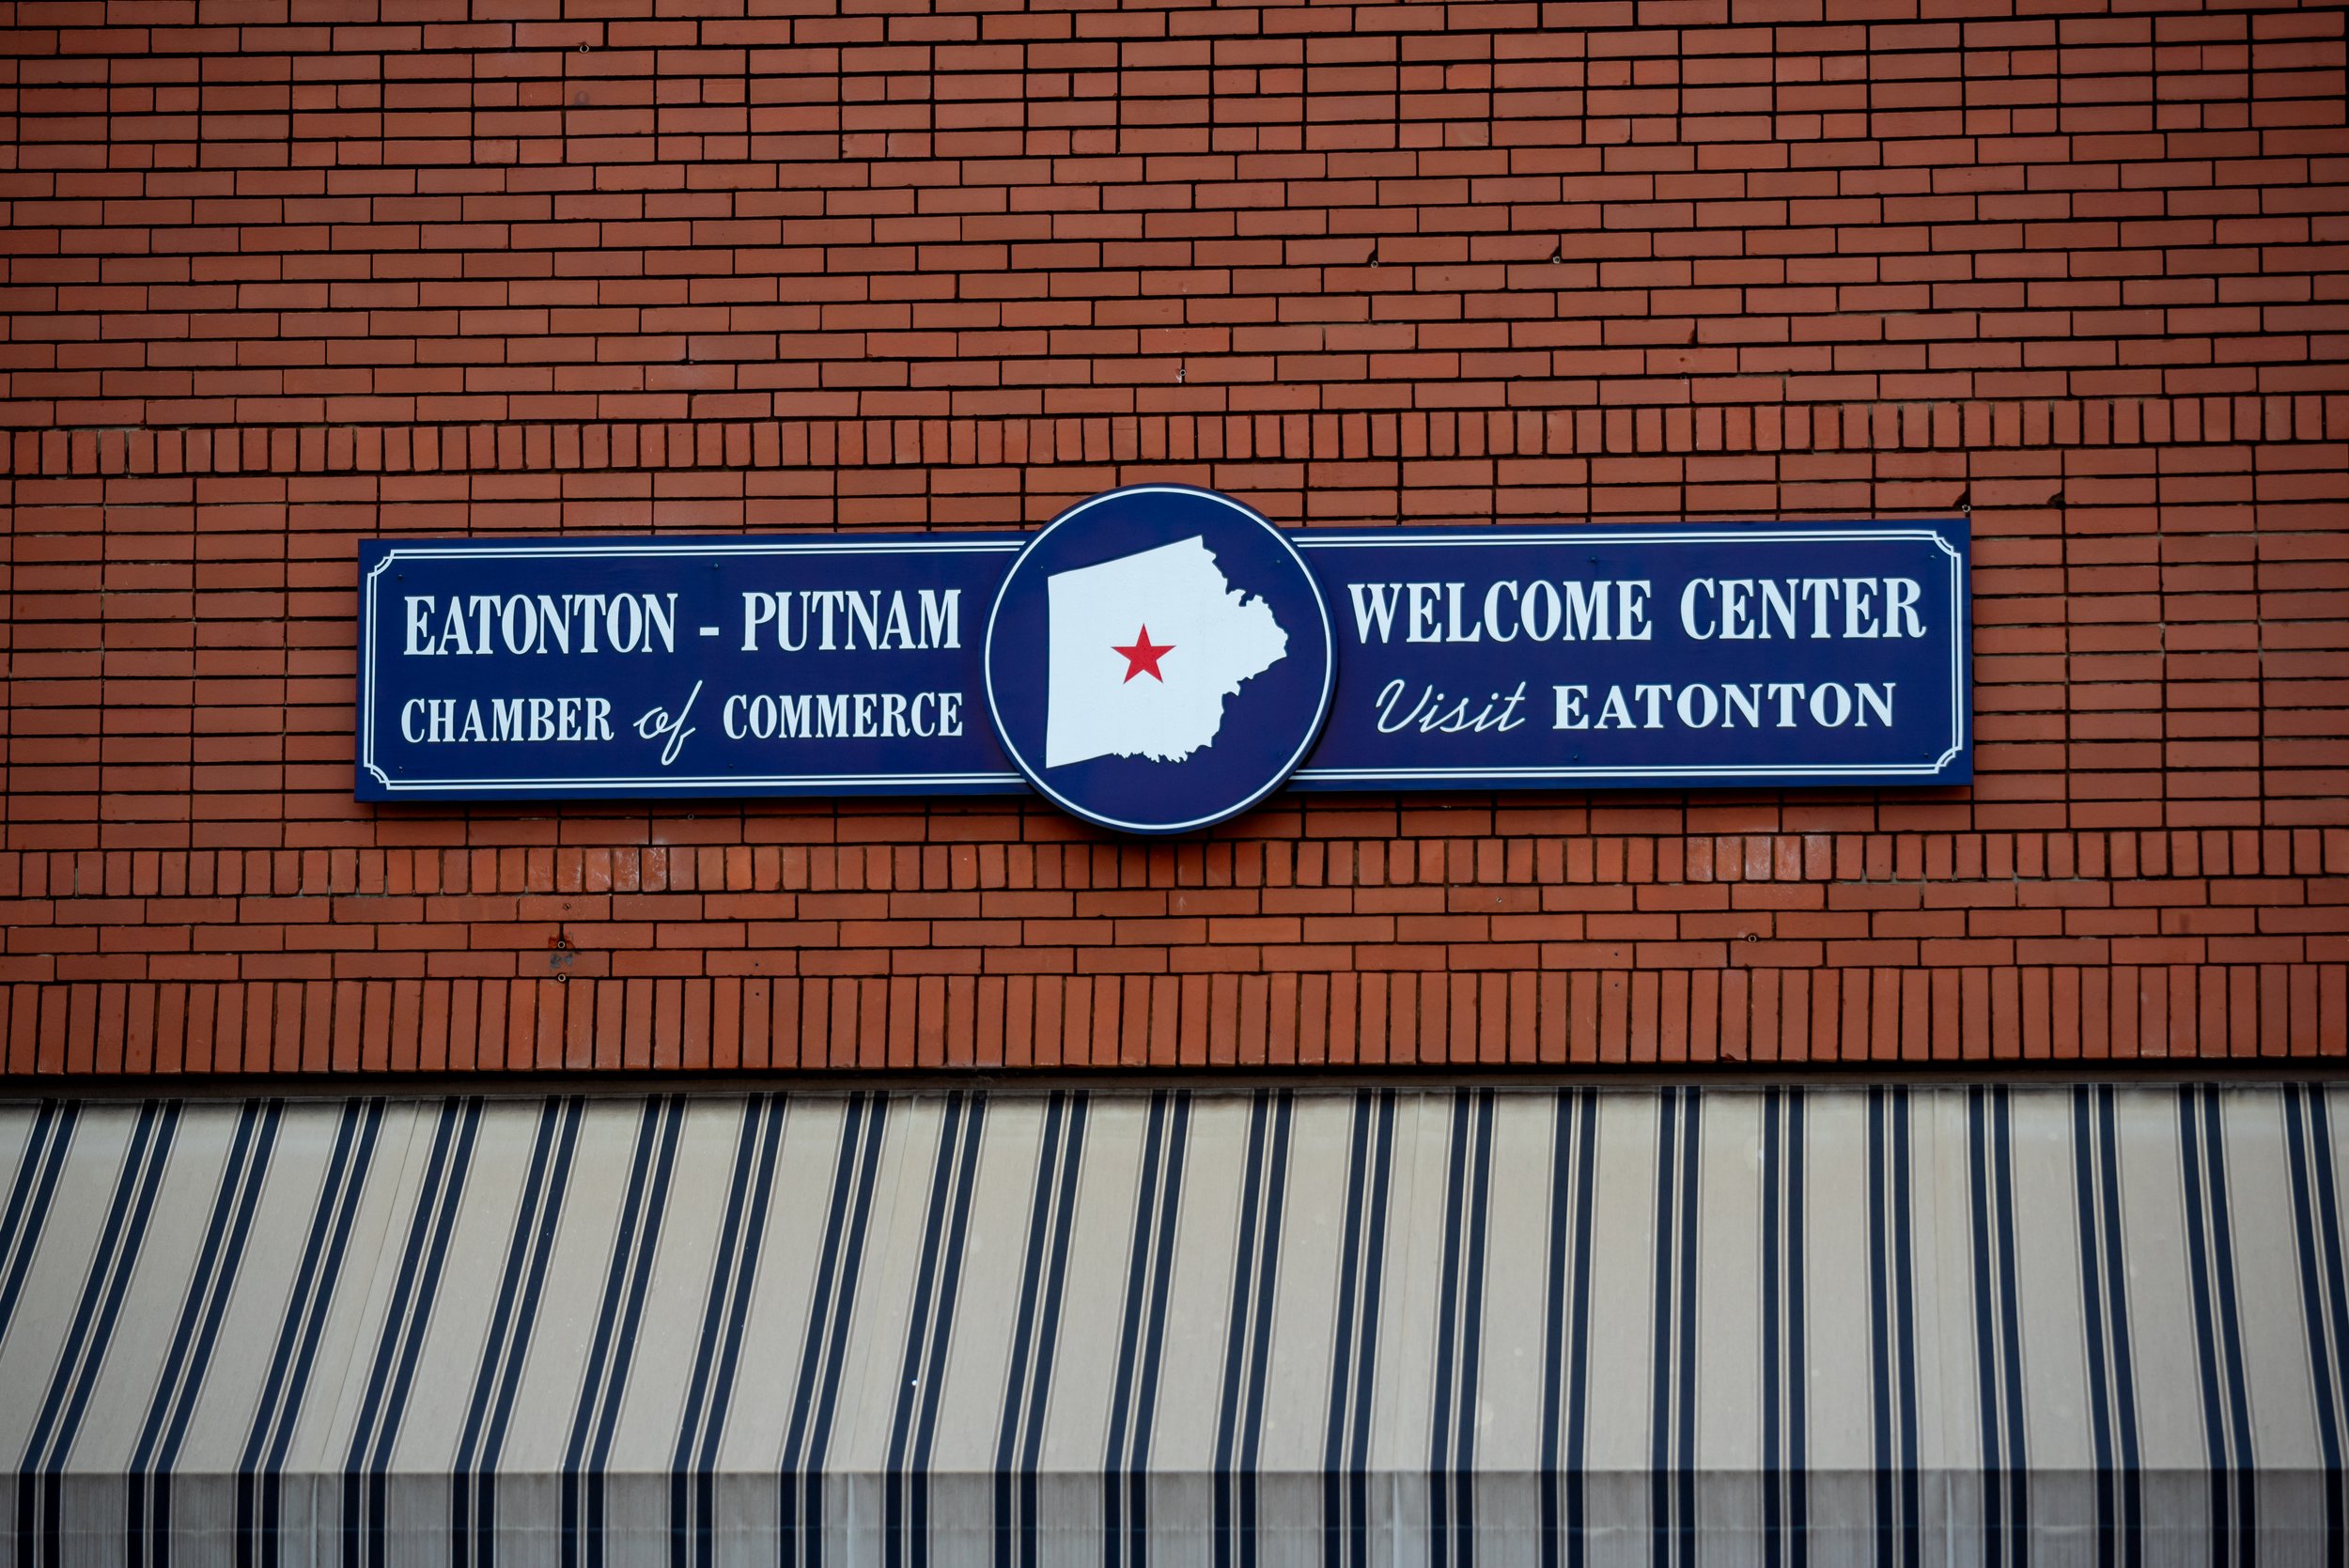 Front Signage of the Eatonton-Putnam Chamber of Commerce Office Building